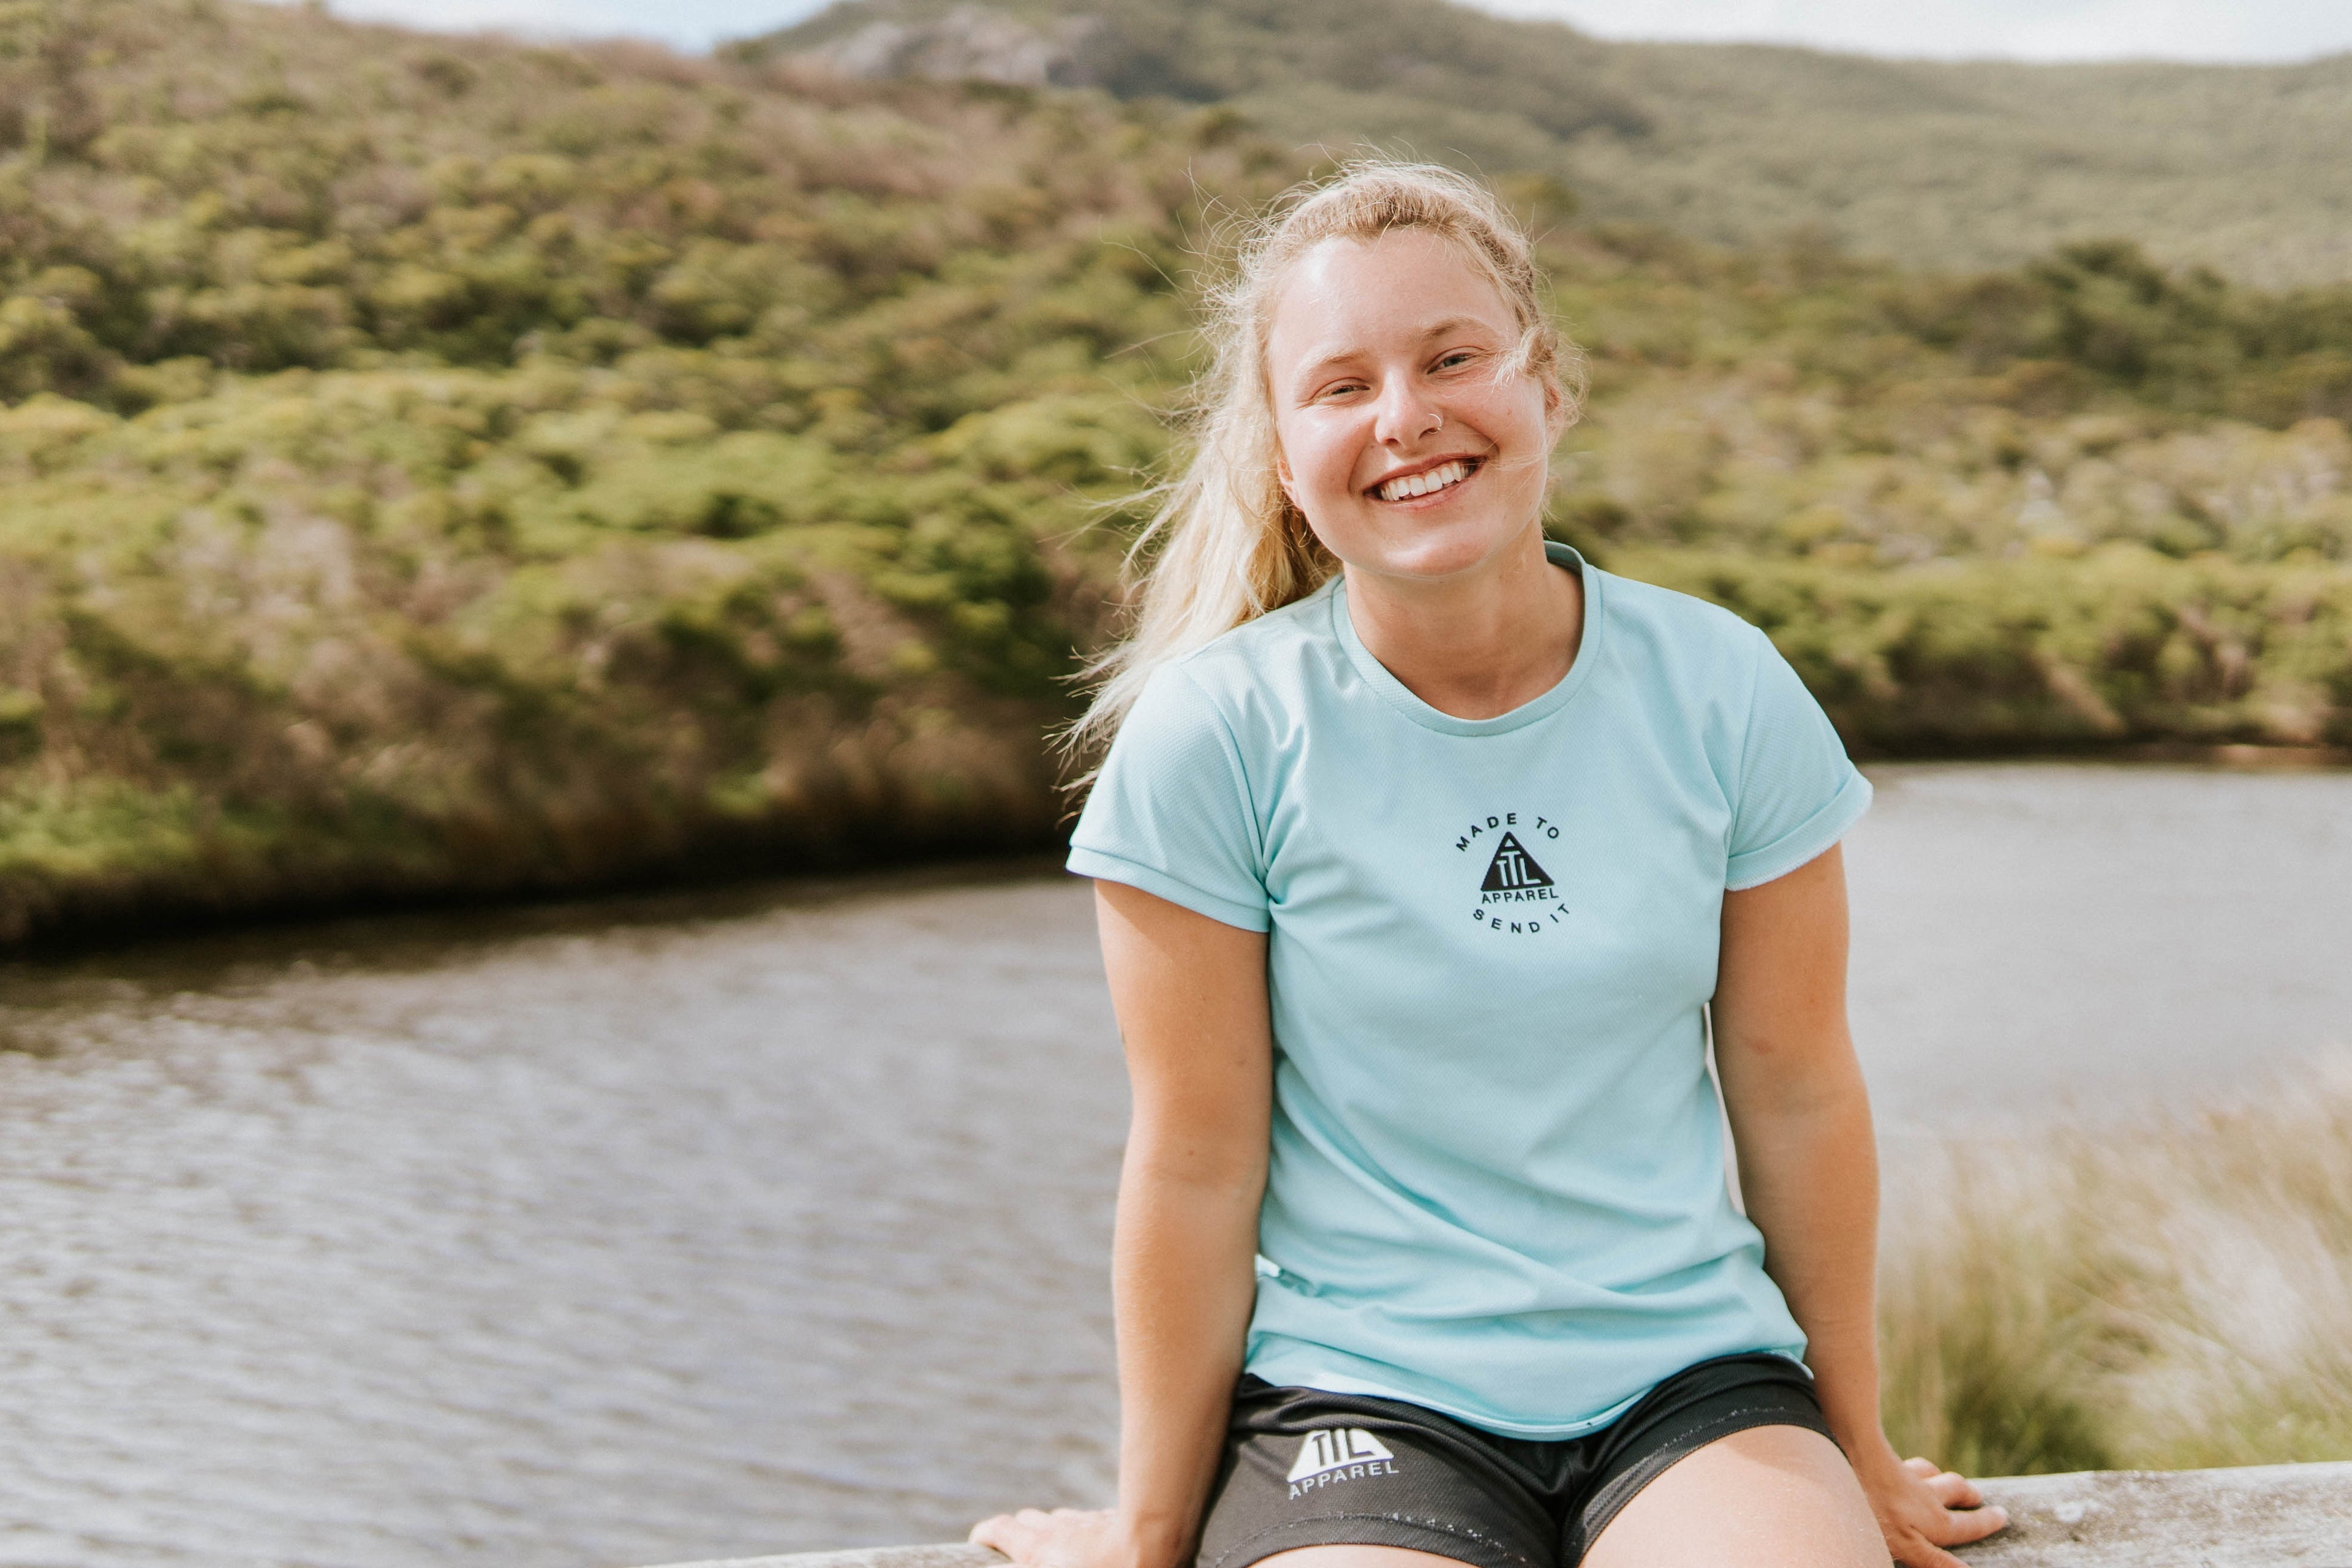 Our favourite workout top in teal. This top is made for training, running or the gym. Made in Australia from 100% recycled material. 